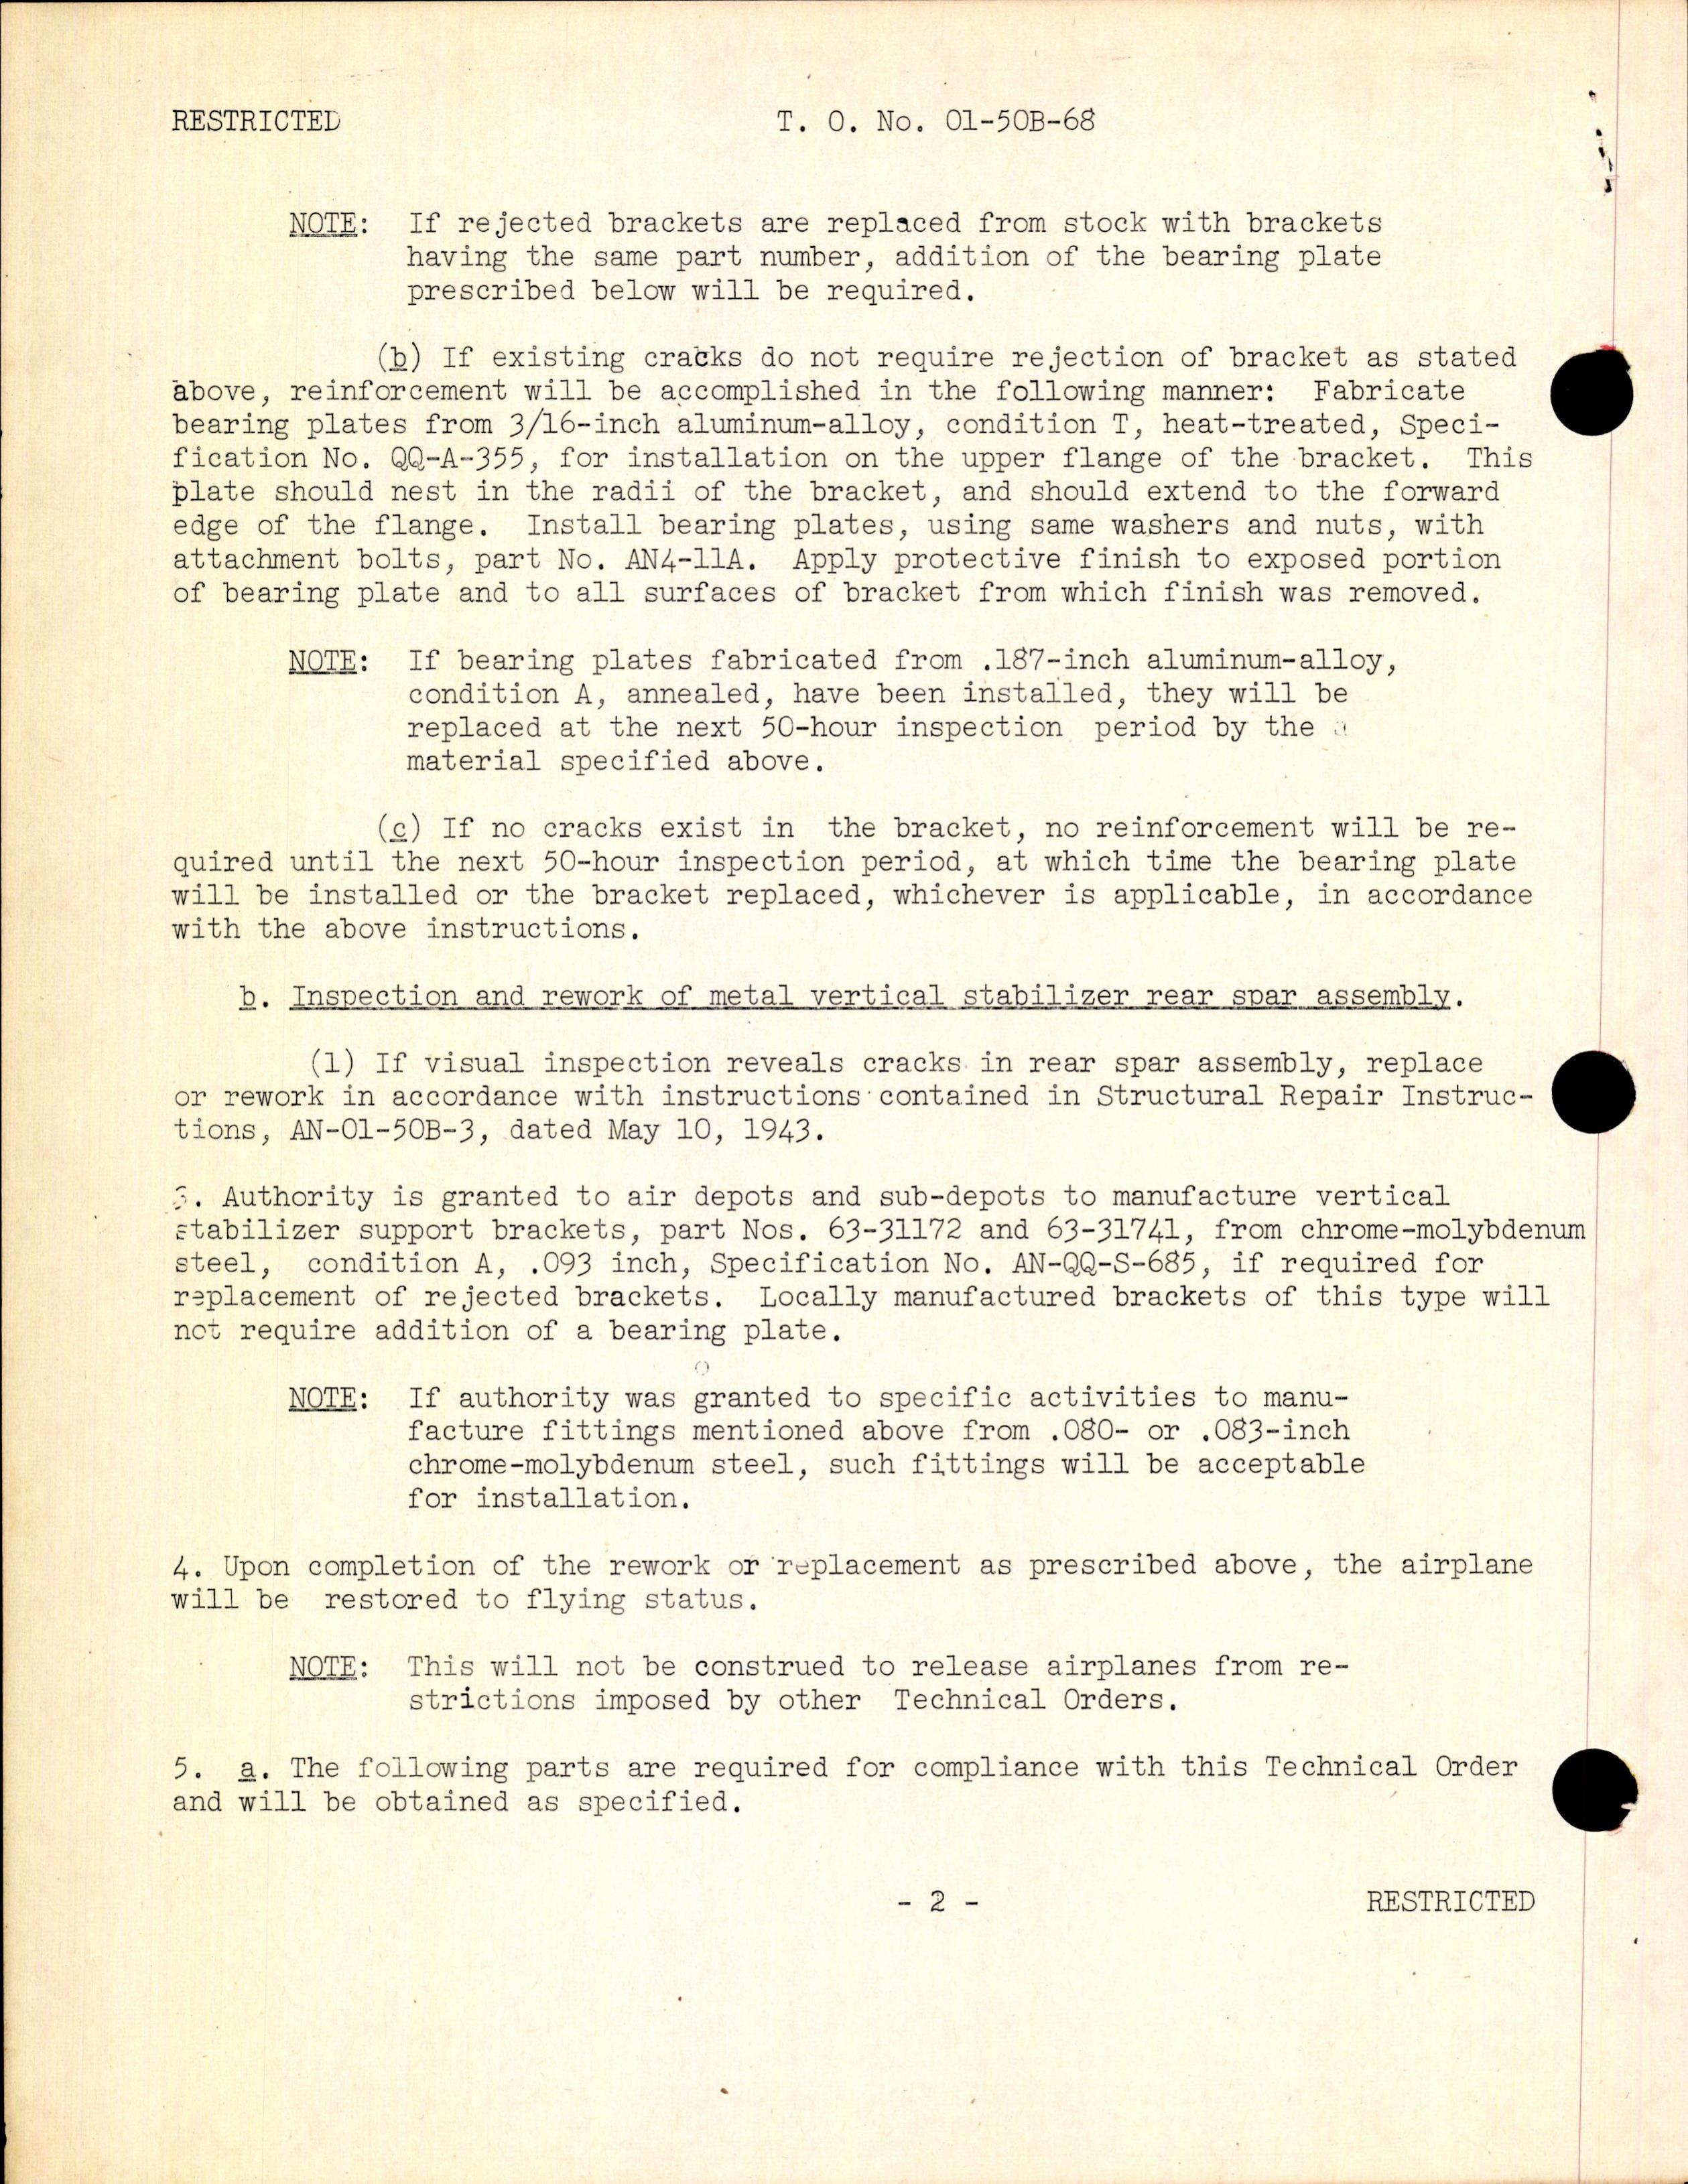 Sample page 2 from AirCorps Library document: Inspection and Rework of Vertical Stabilizer Front Spar Support Brackets and Rear Spar Assemblies, BT-13, BT-13A, BT-15, and SNV-1